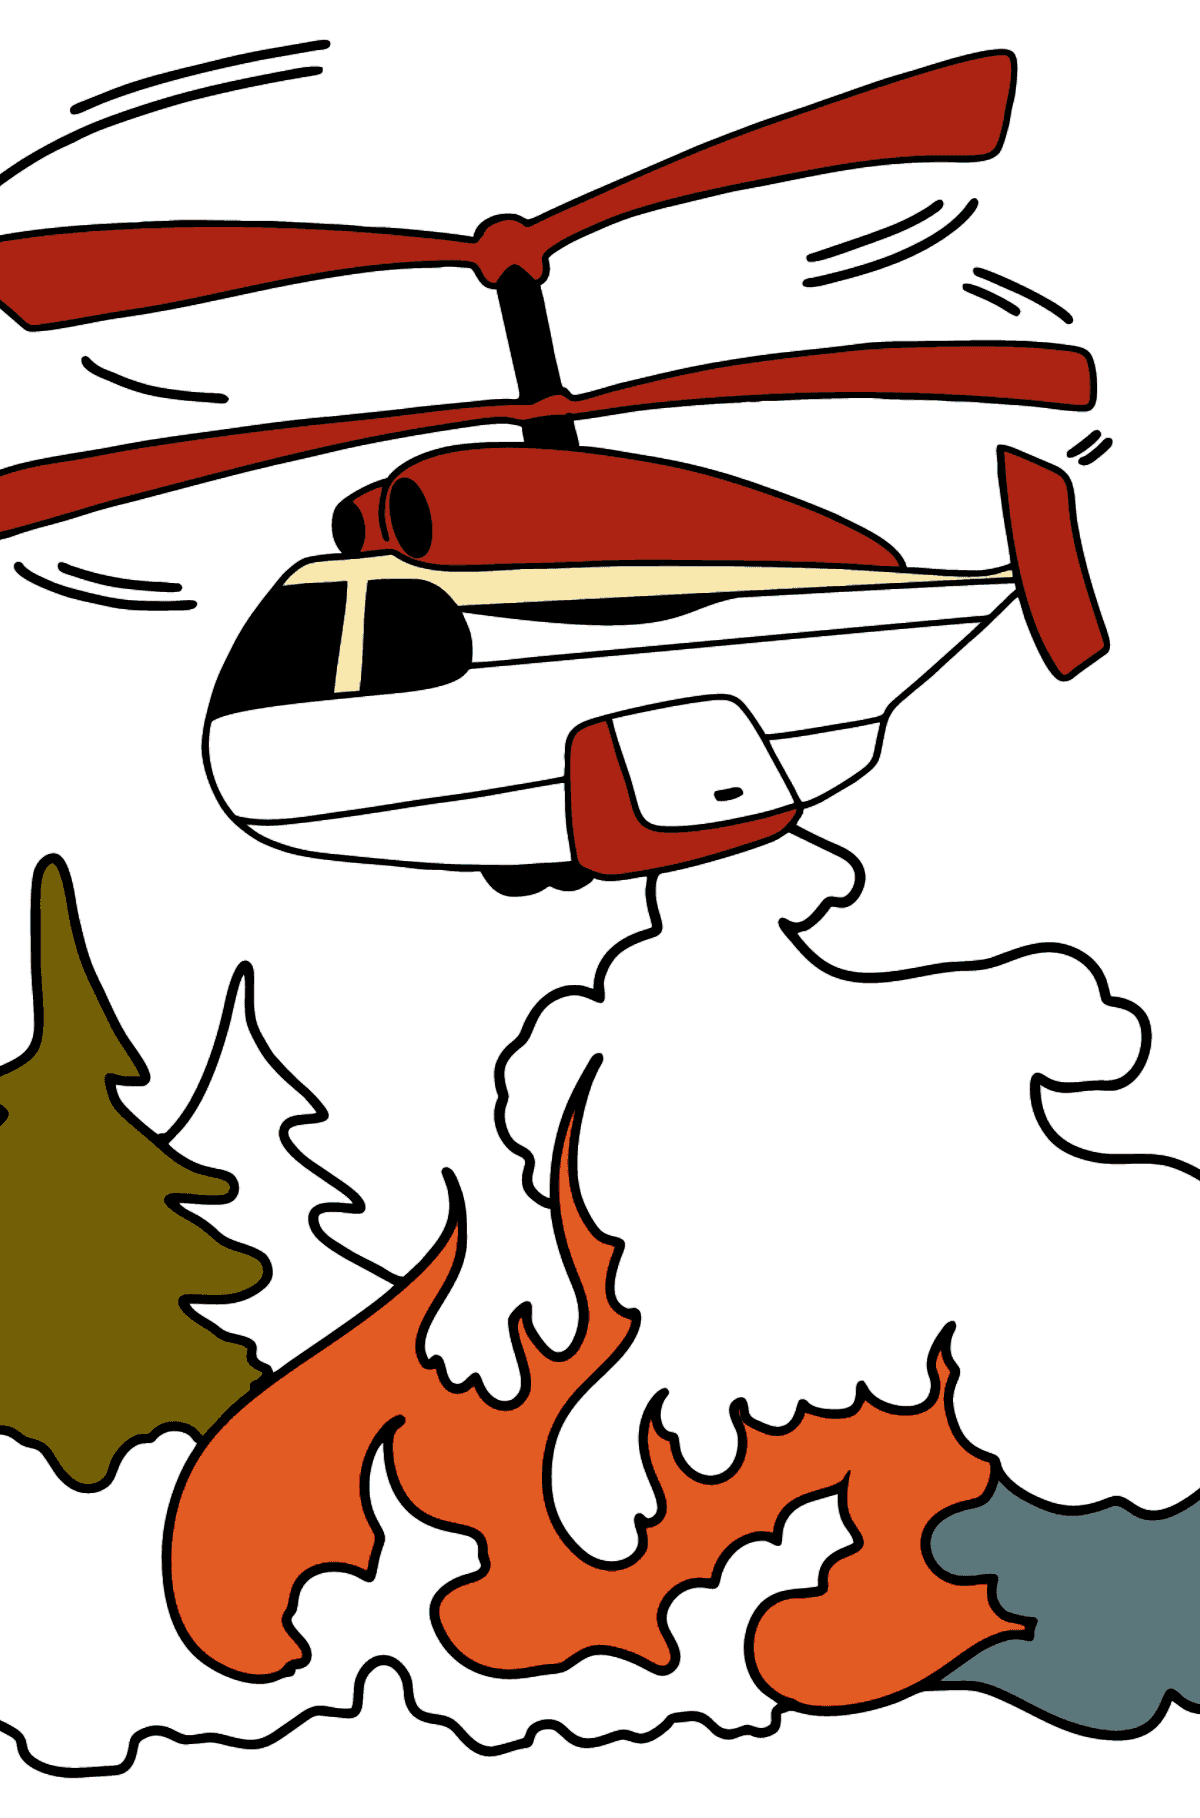 Helicopter Extinguishing Fire coloring page - Coloring Pages for Kids